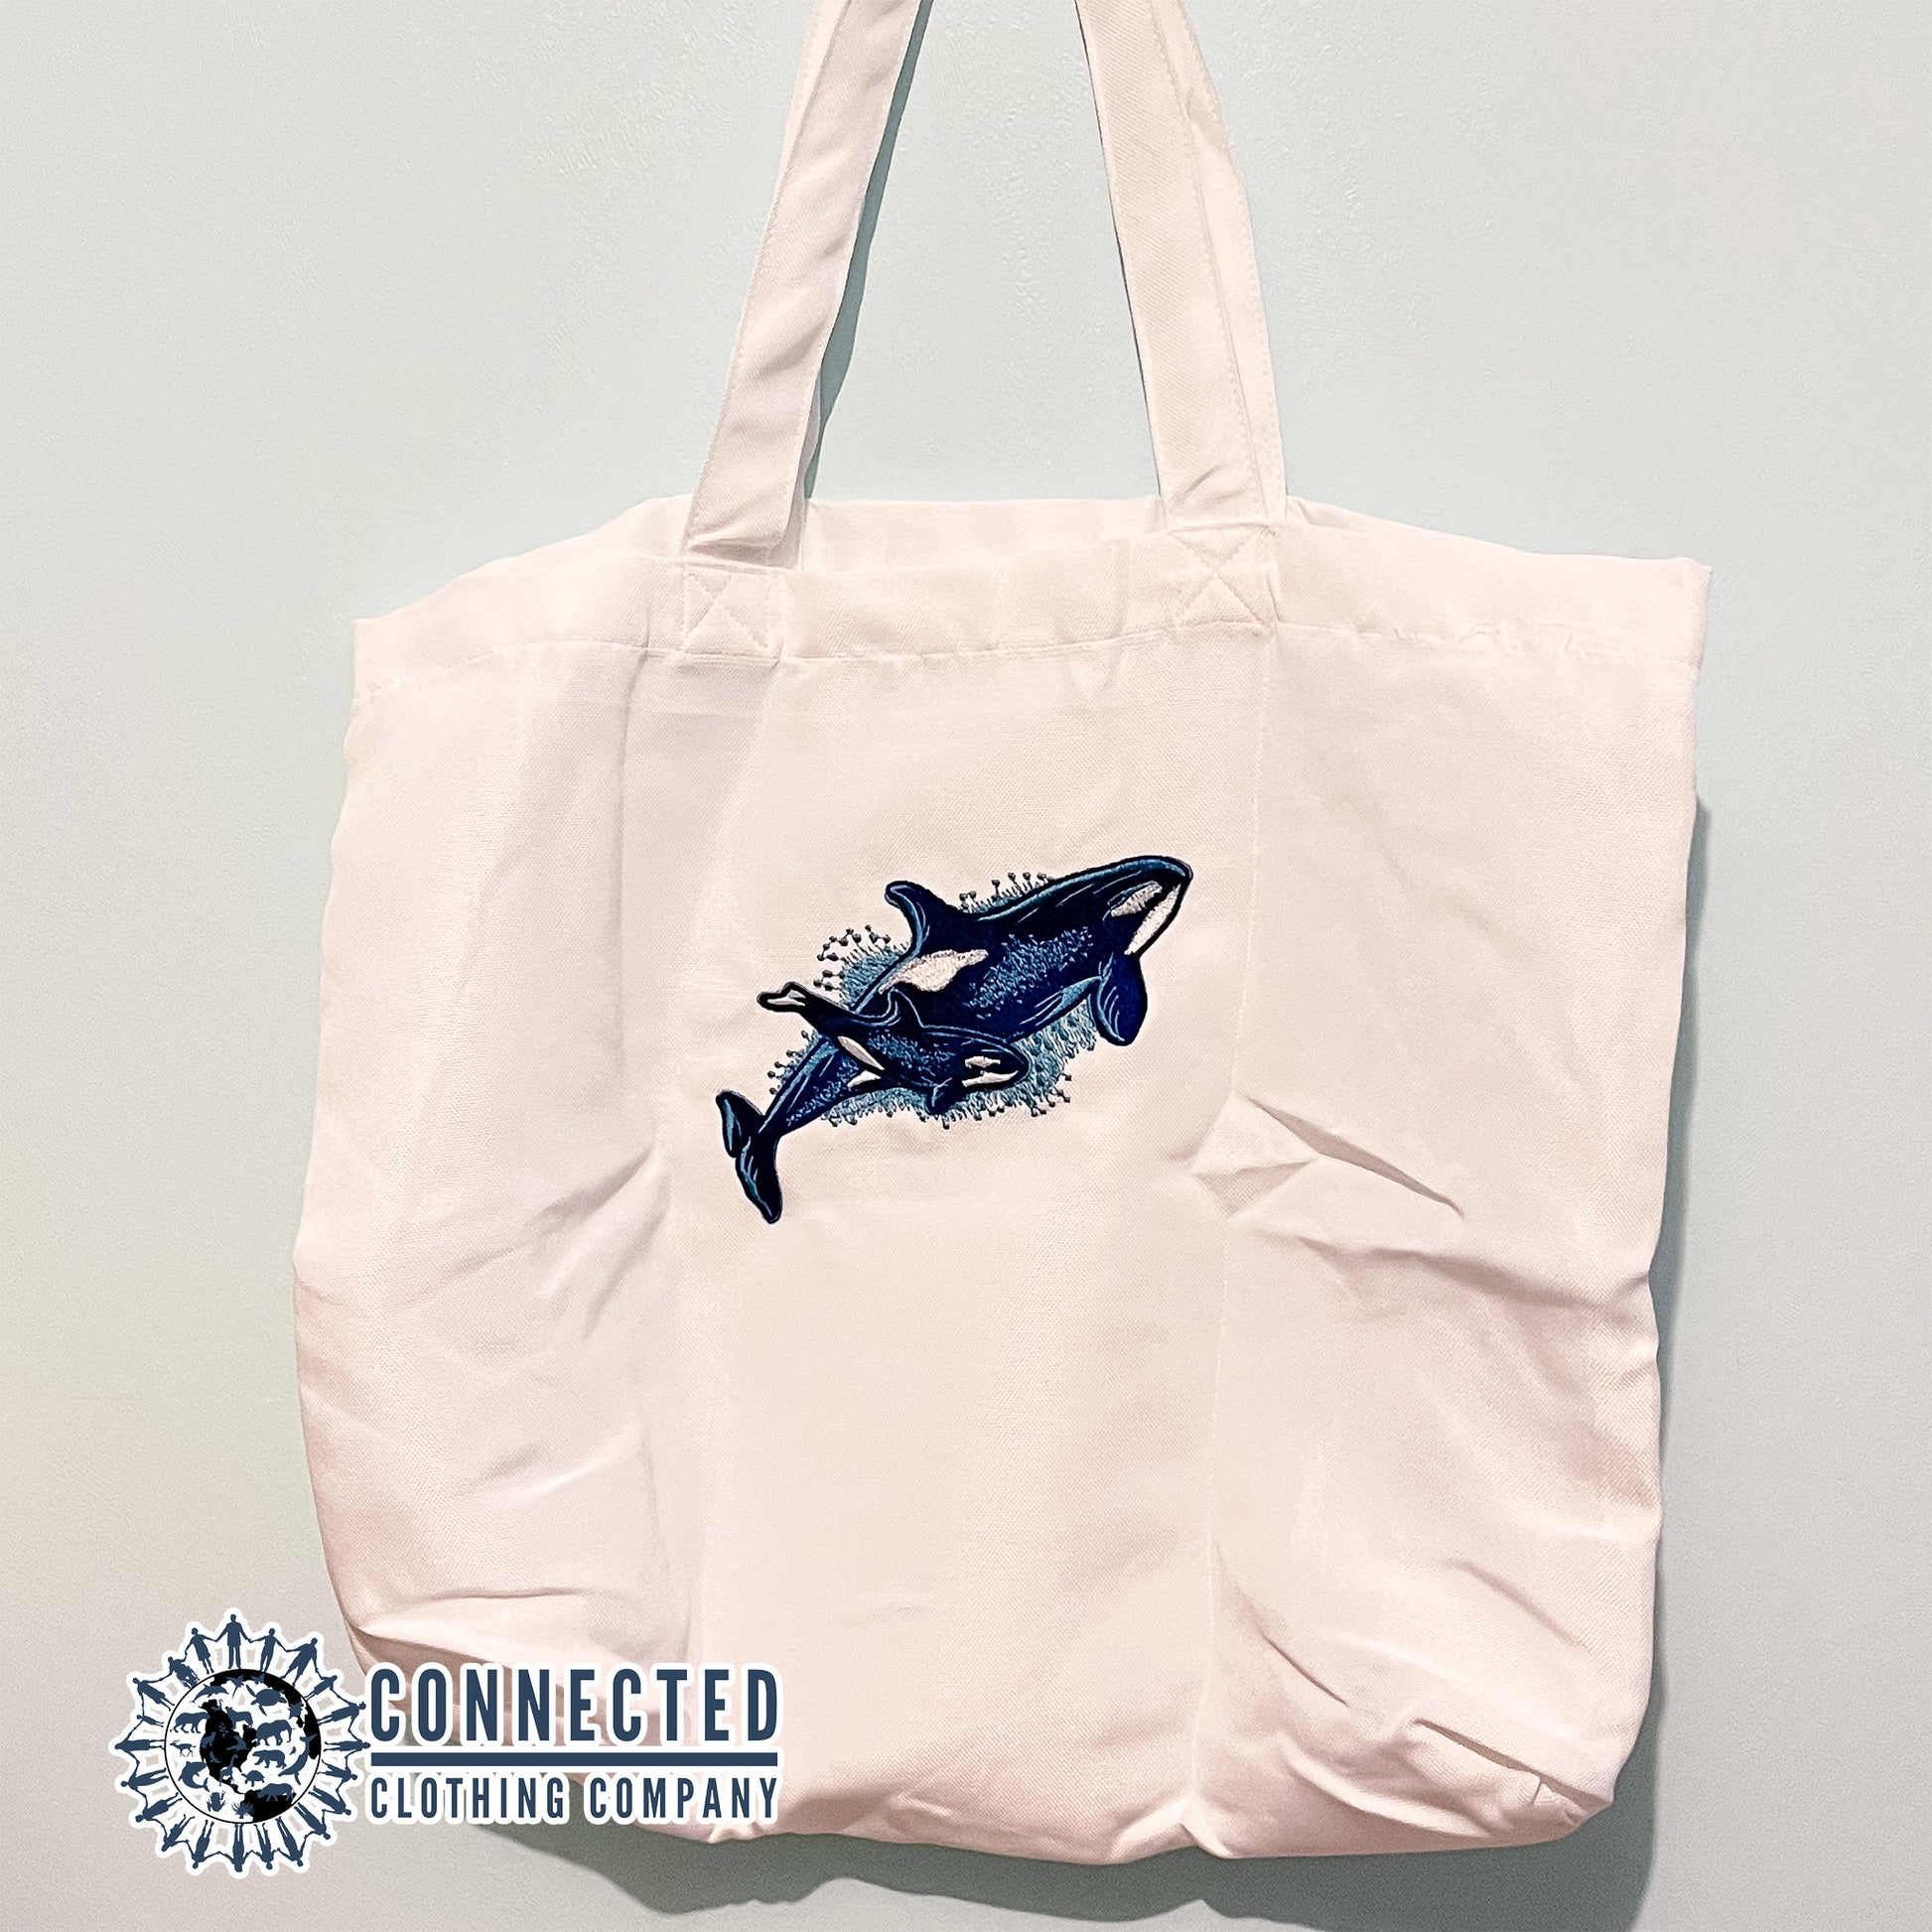 Orca Whale Embroidered Tote Bag - Connected Clothing Company - 10% of proceeds donated to ocean conservation